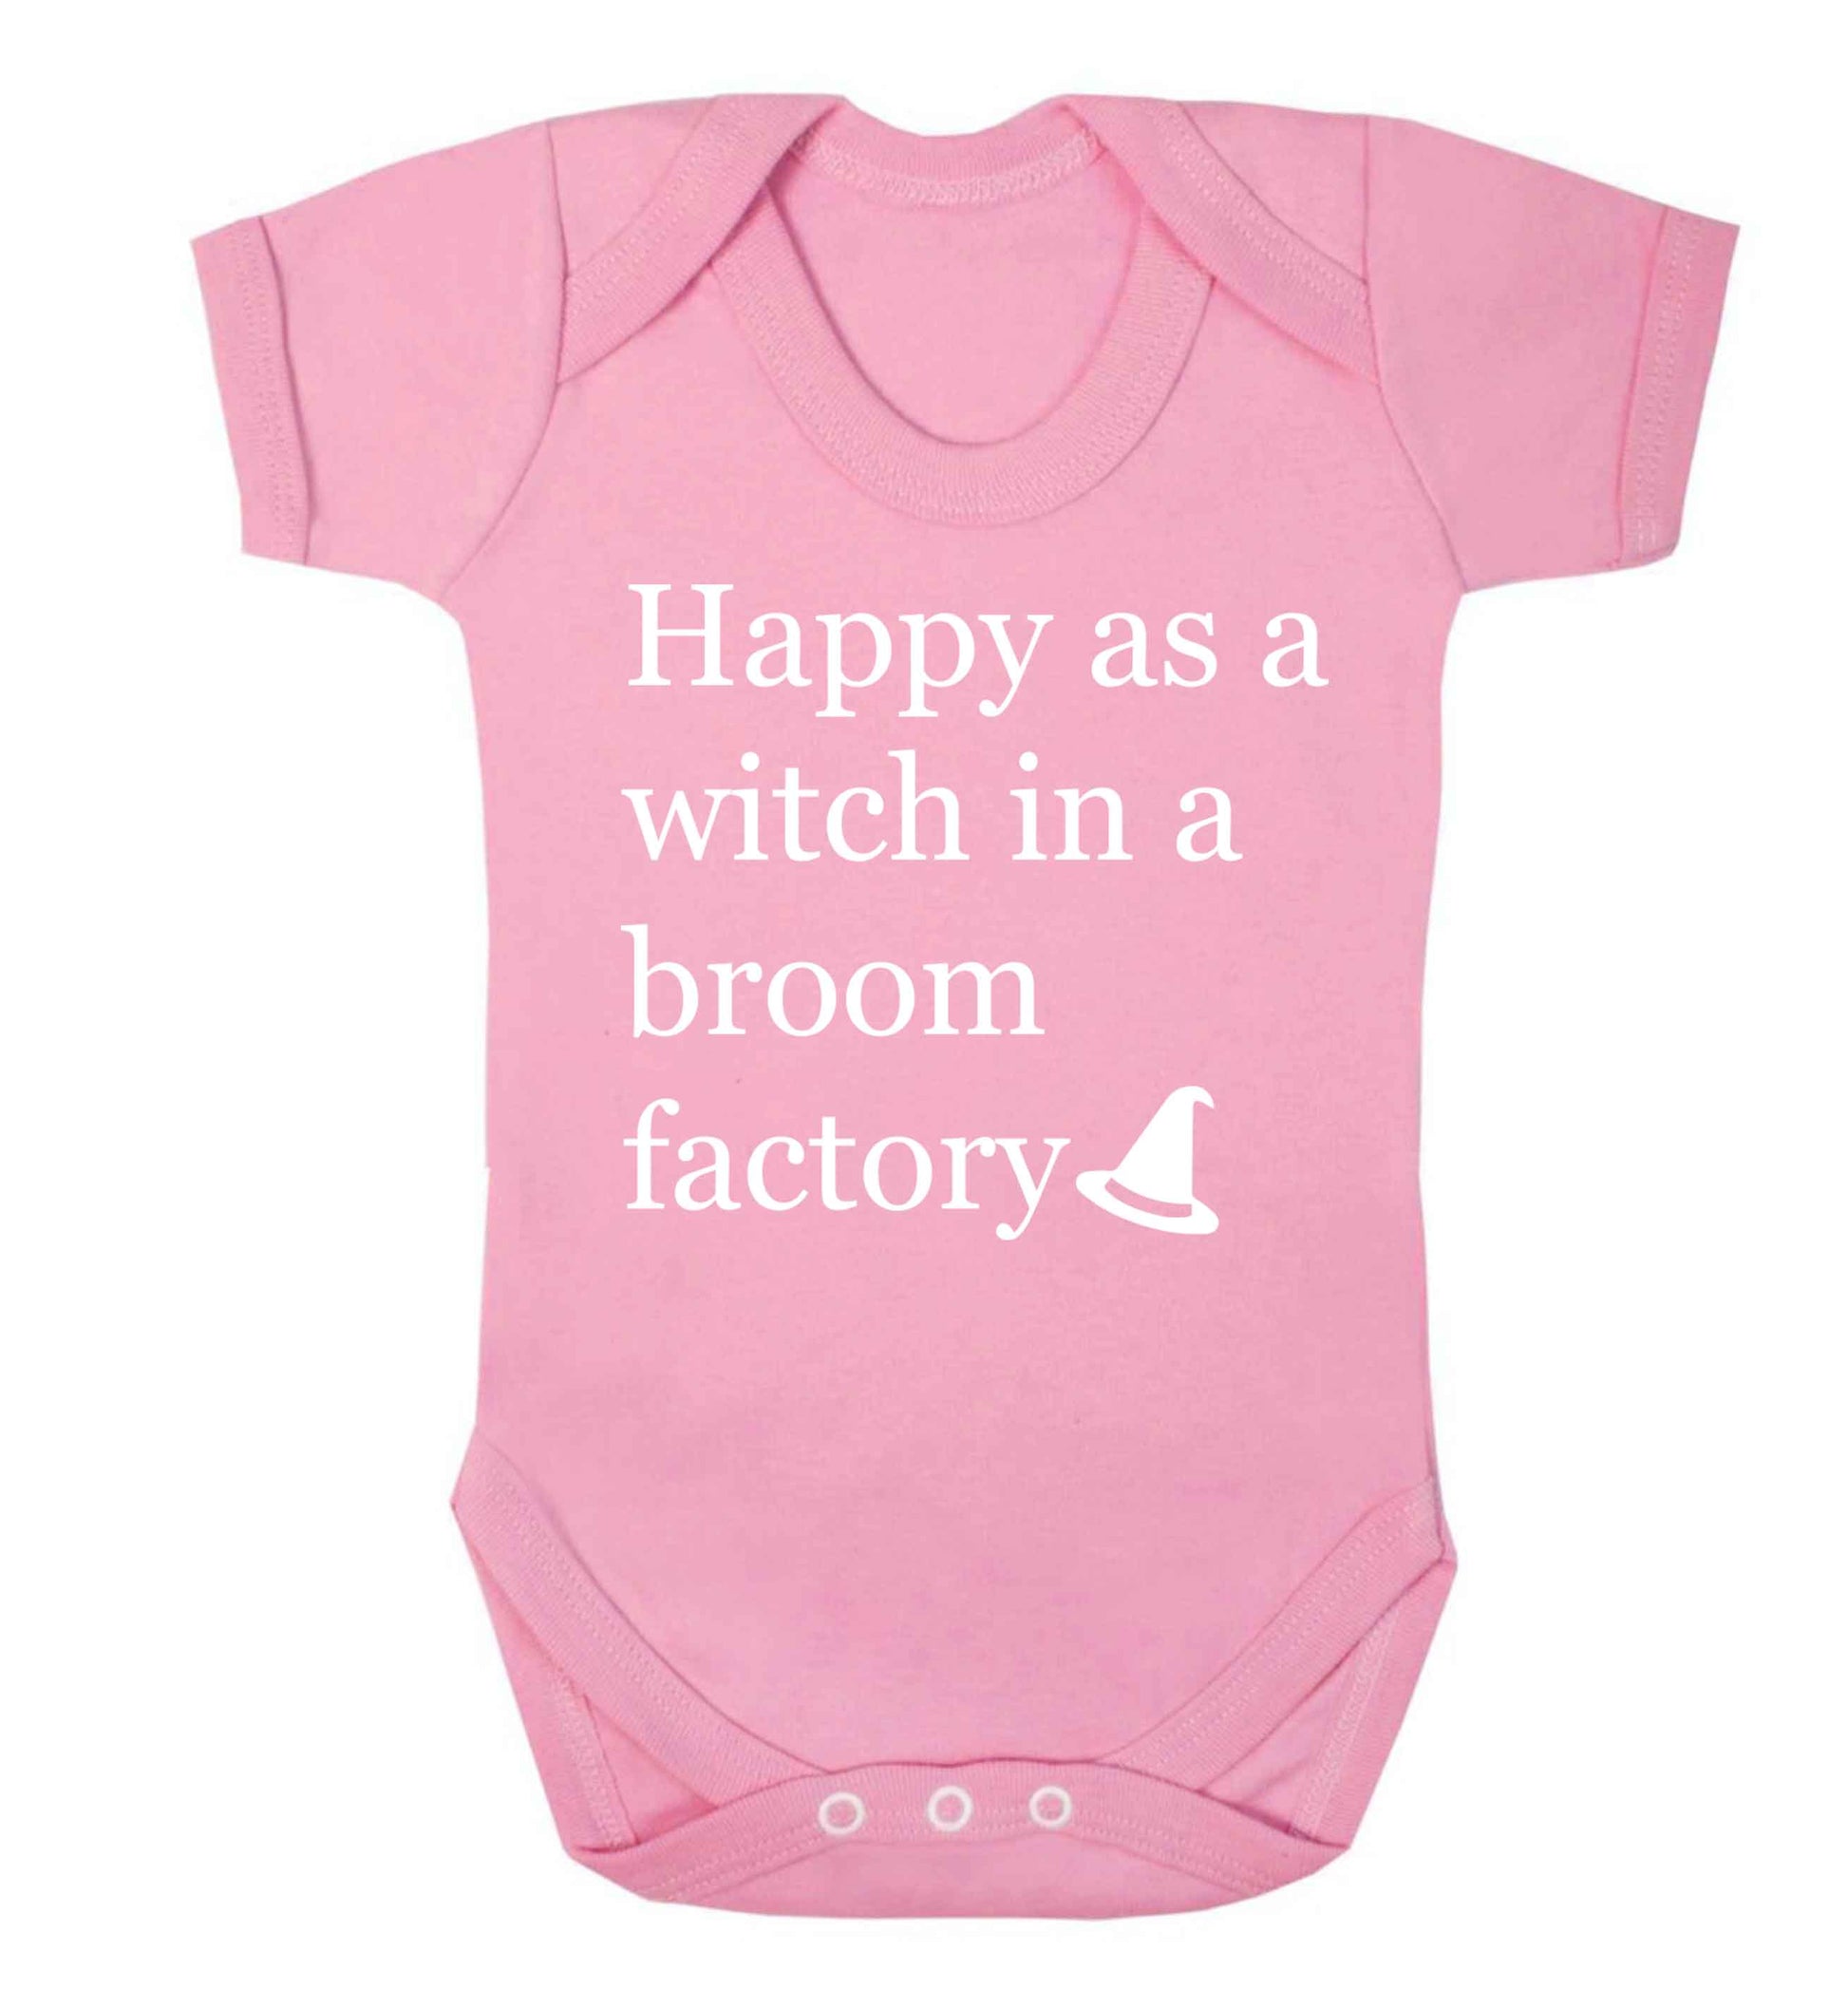 Happy as a witch in a broom factory Baby Vest pale pink 18-24 months